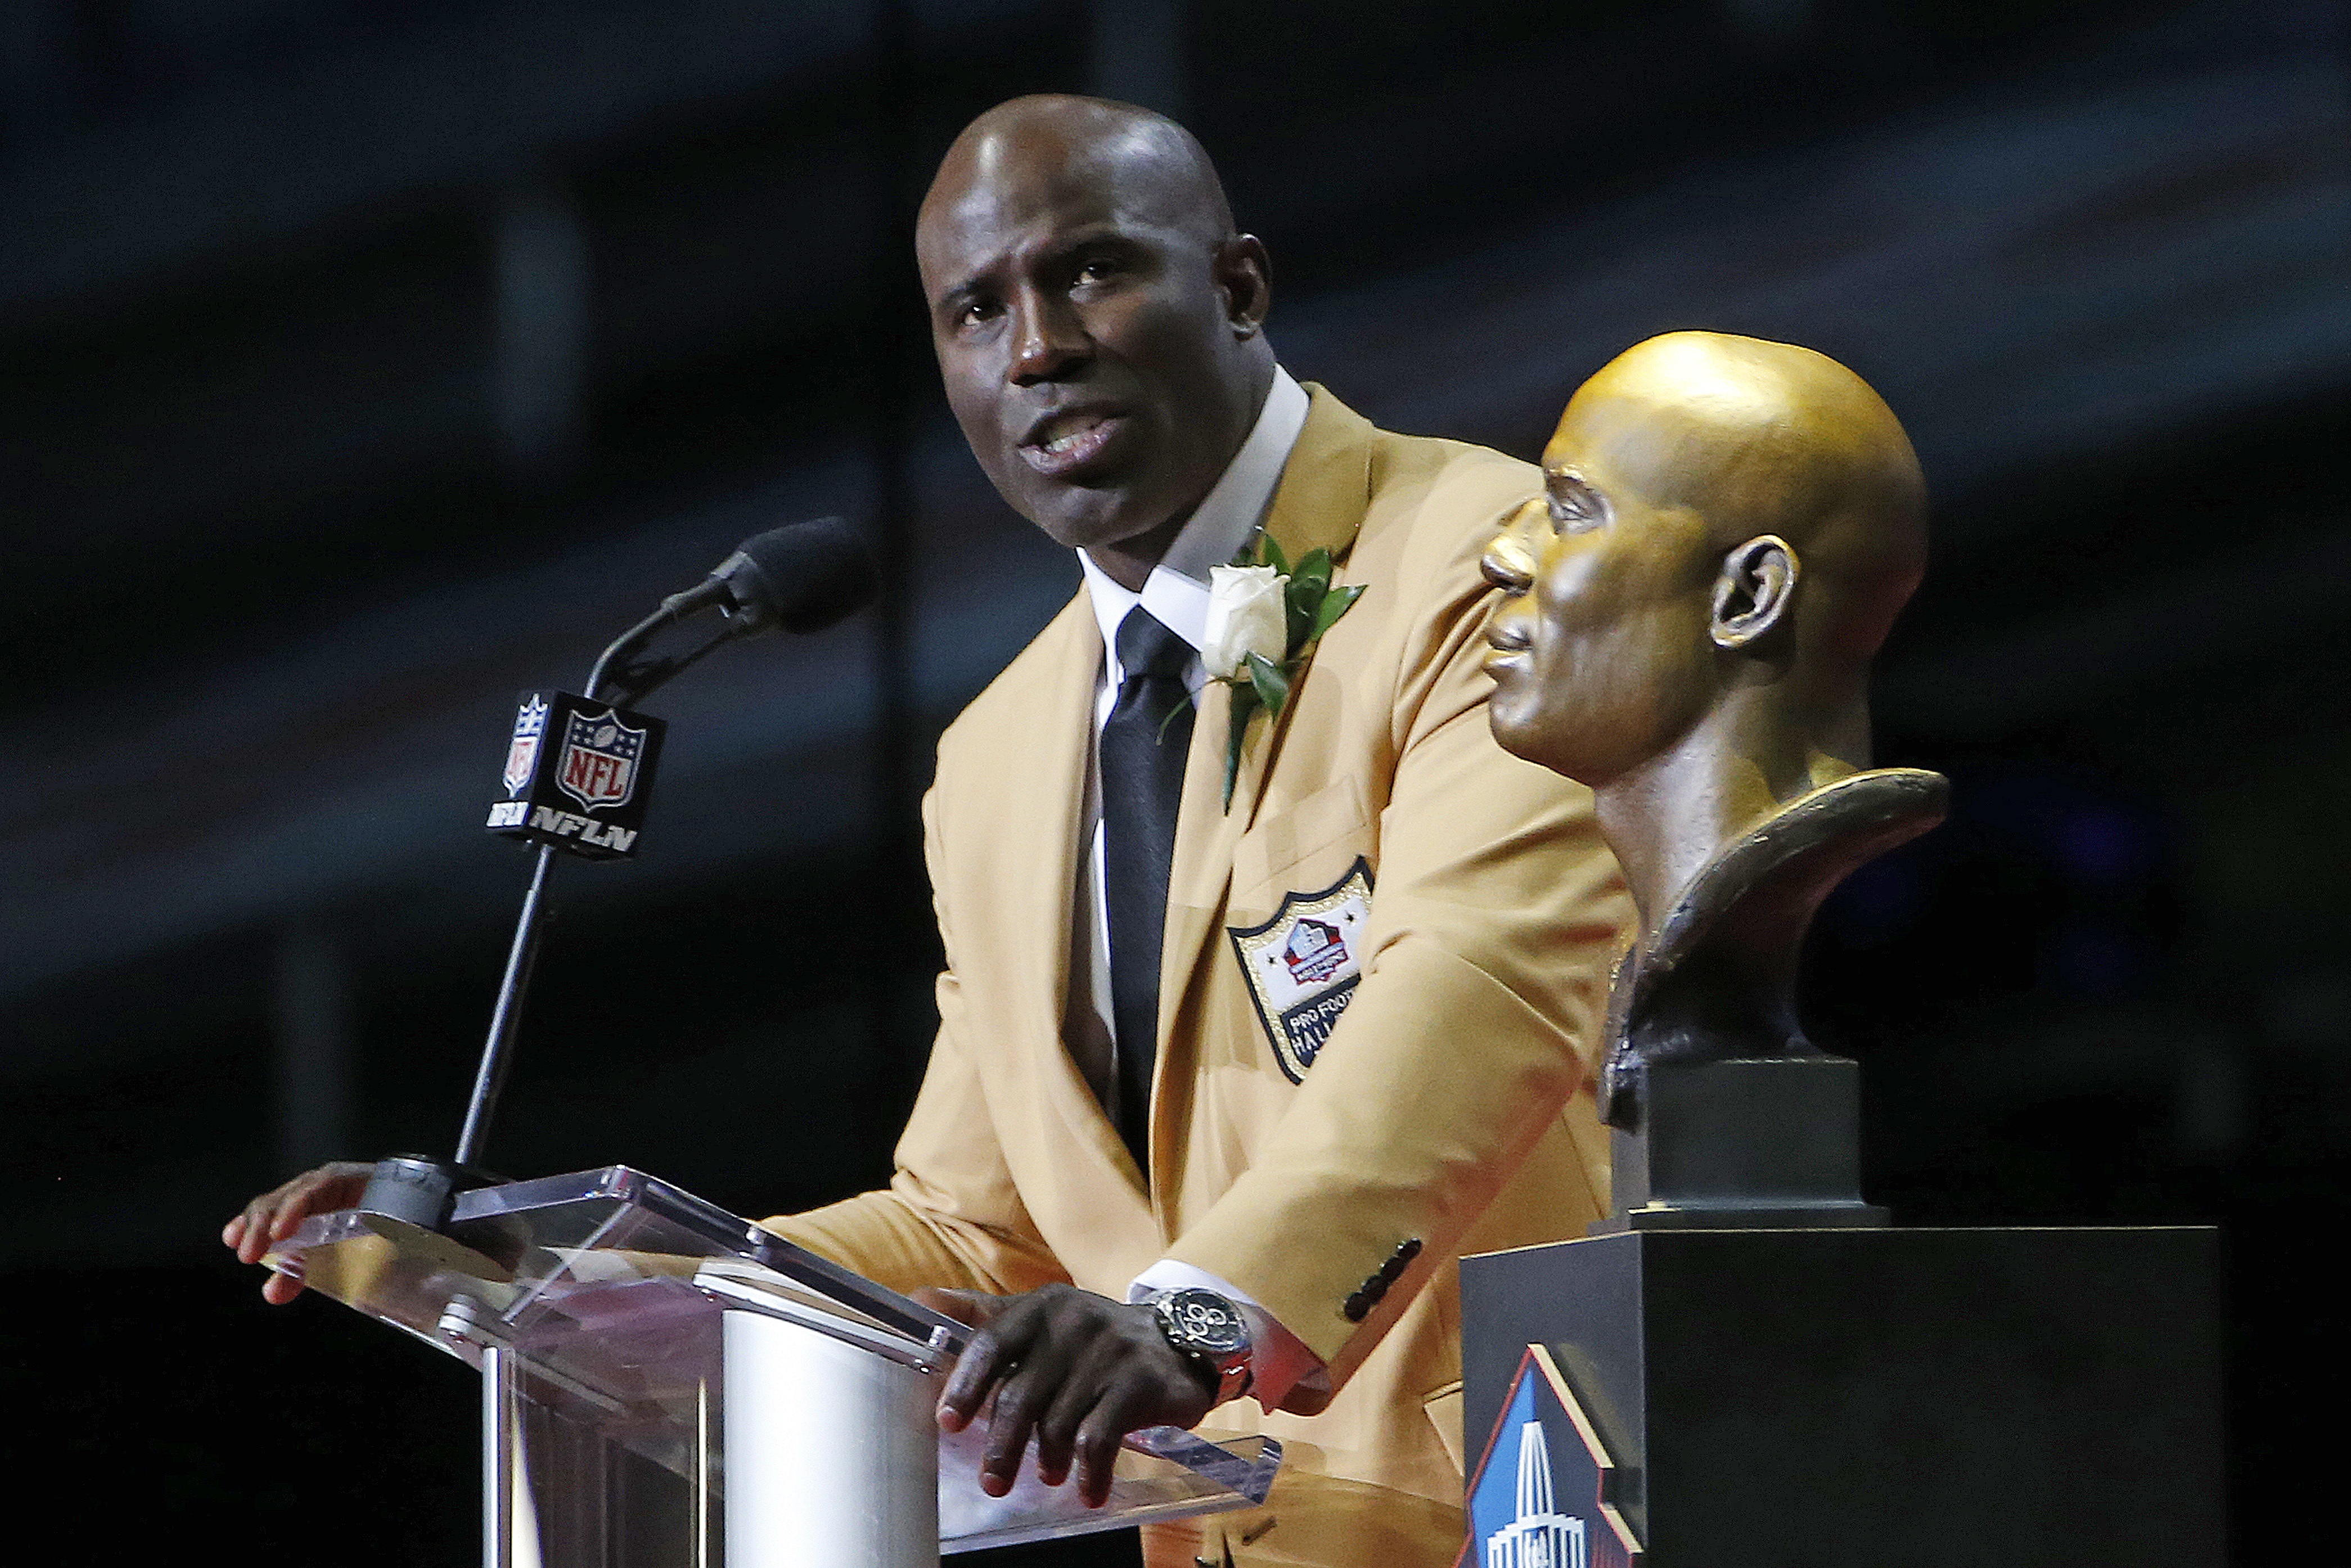 Pro Football Hall of Fame career of Terrell Davis sparked by big hit